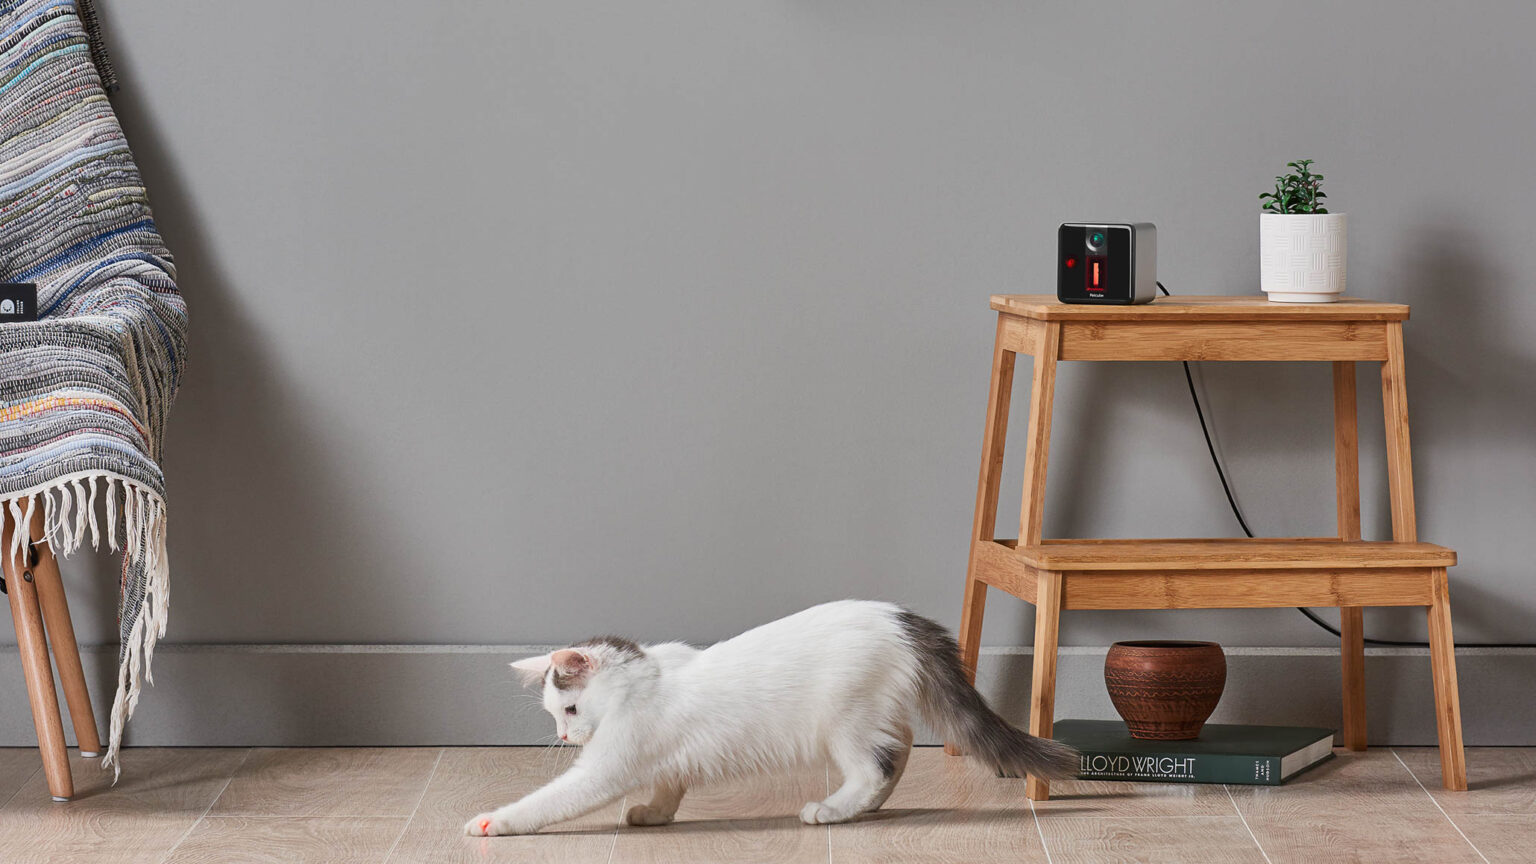 Smart tech for cats, like the Petcube Play camera, can add to their luxury life as your pet. Image: Petcube.